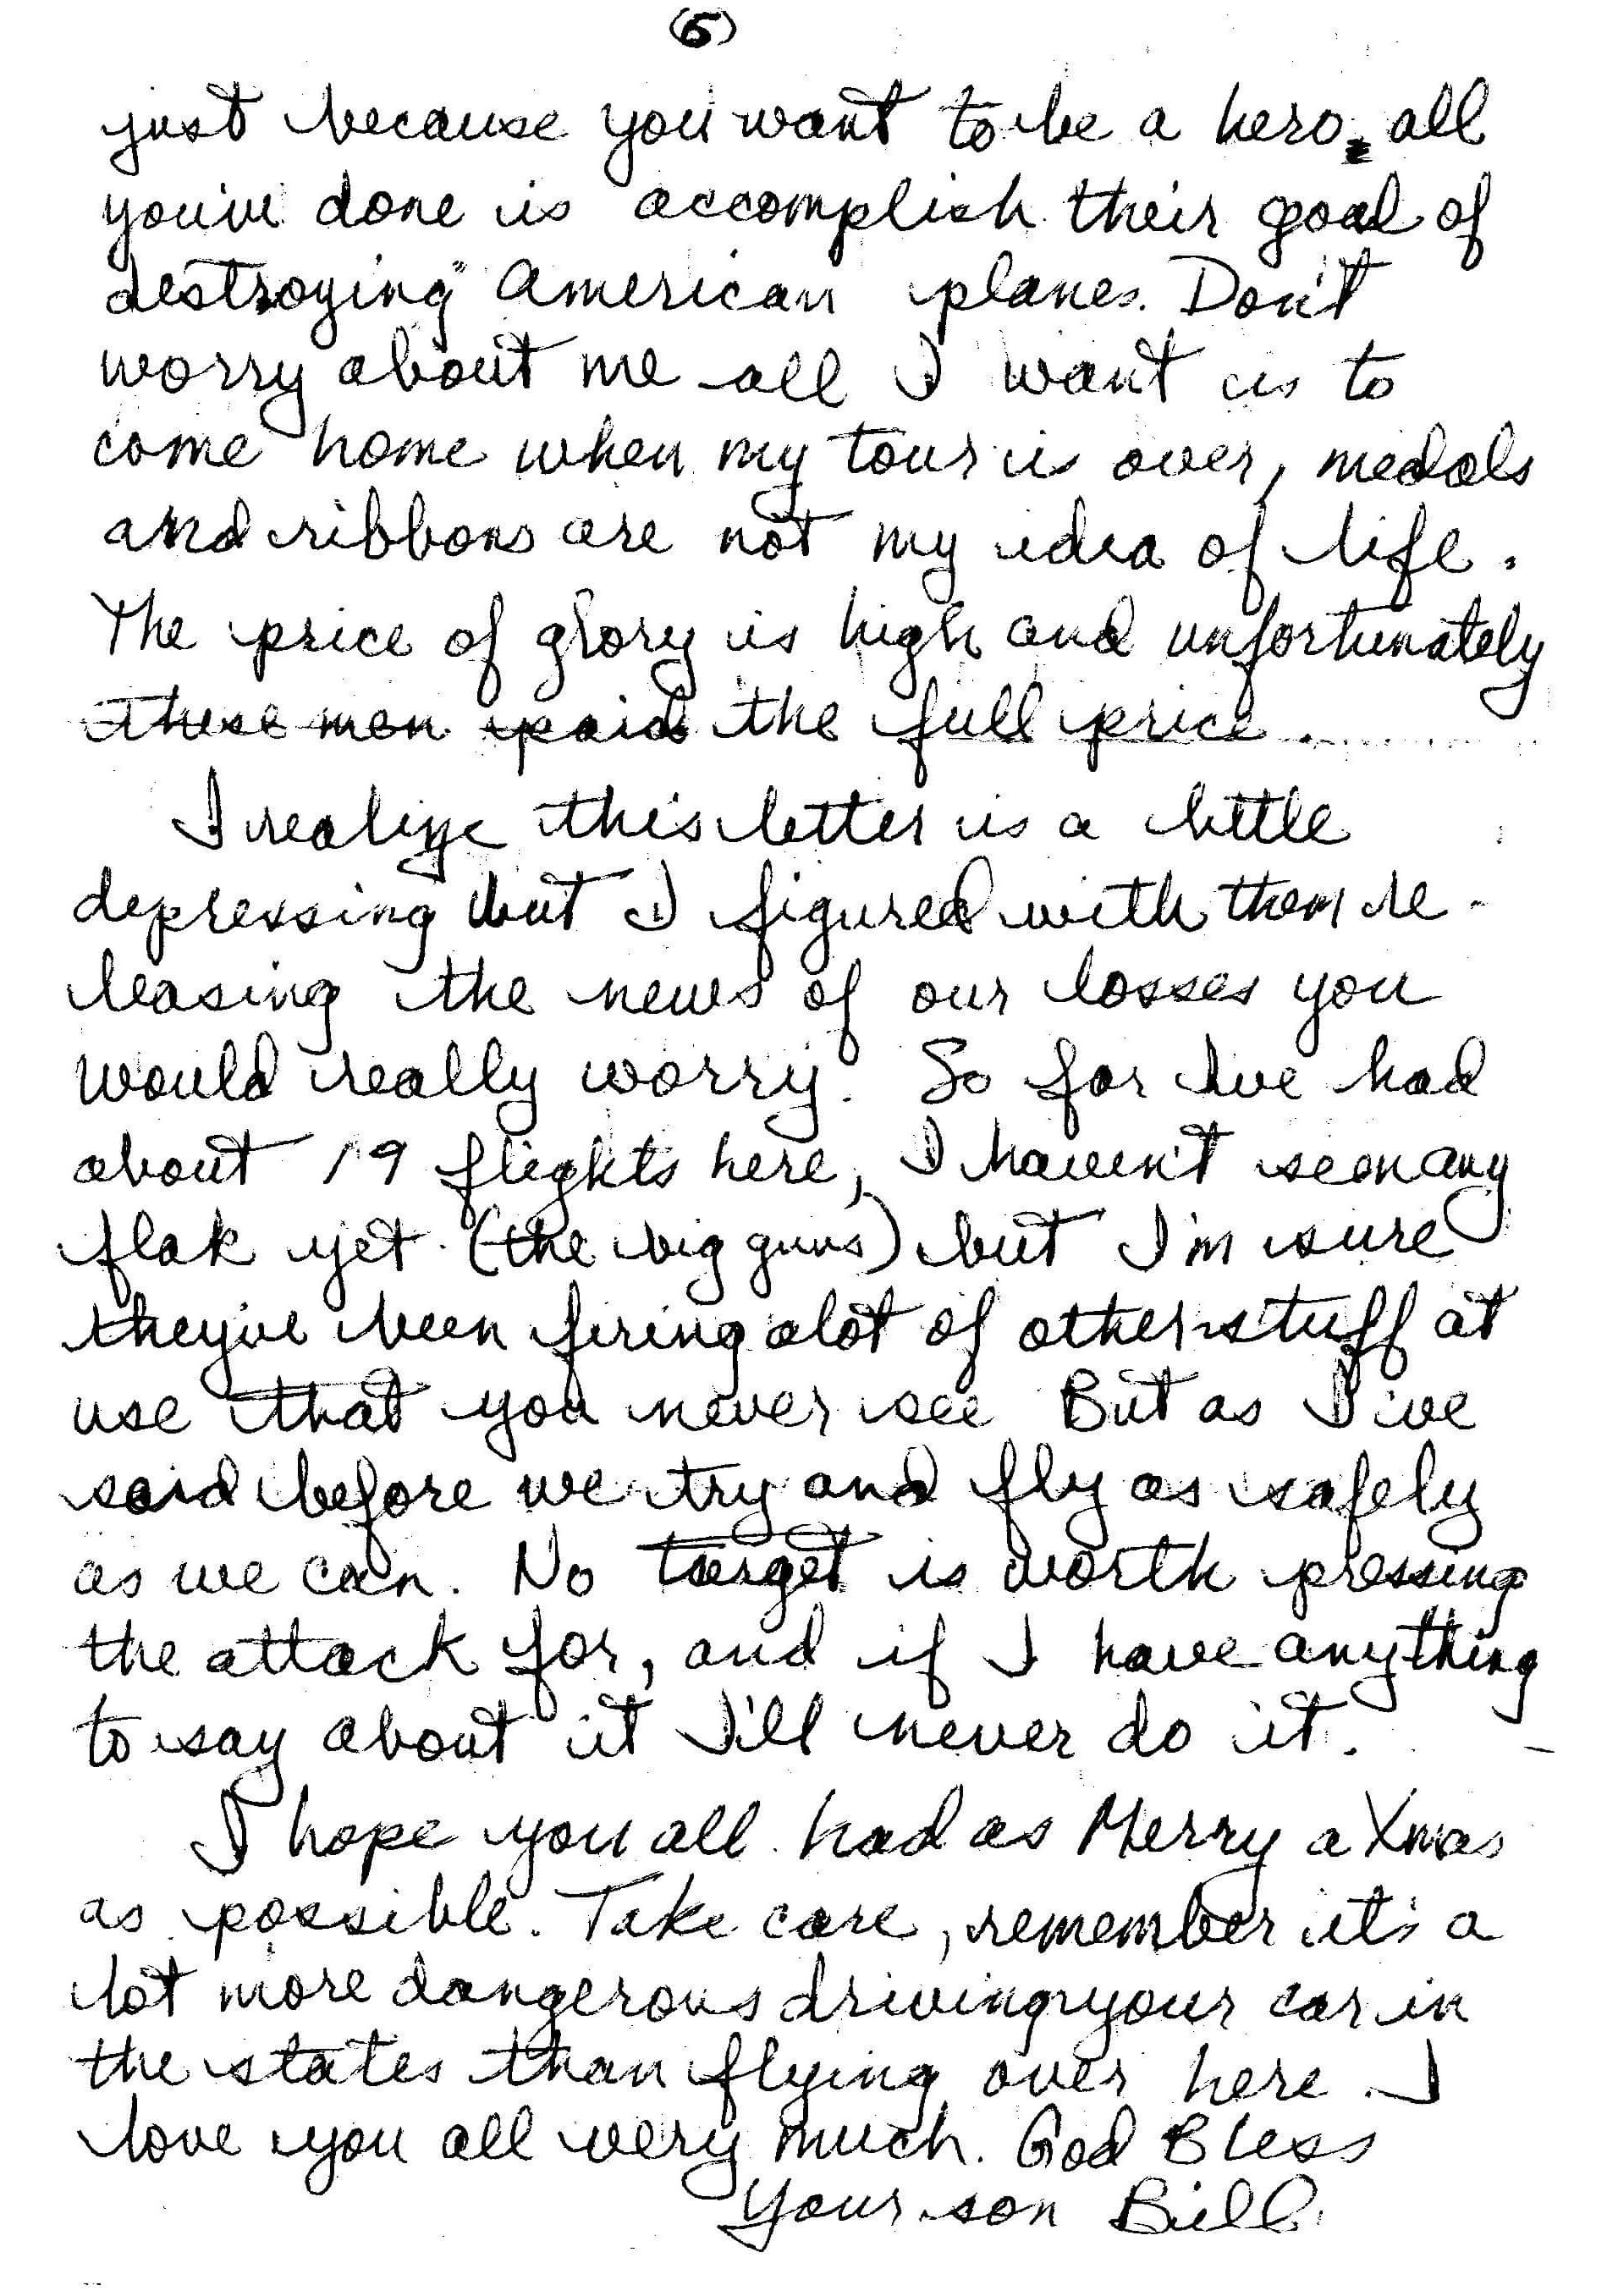 Page 6 of a letter home.